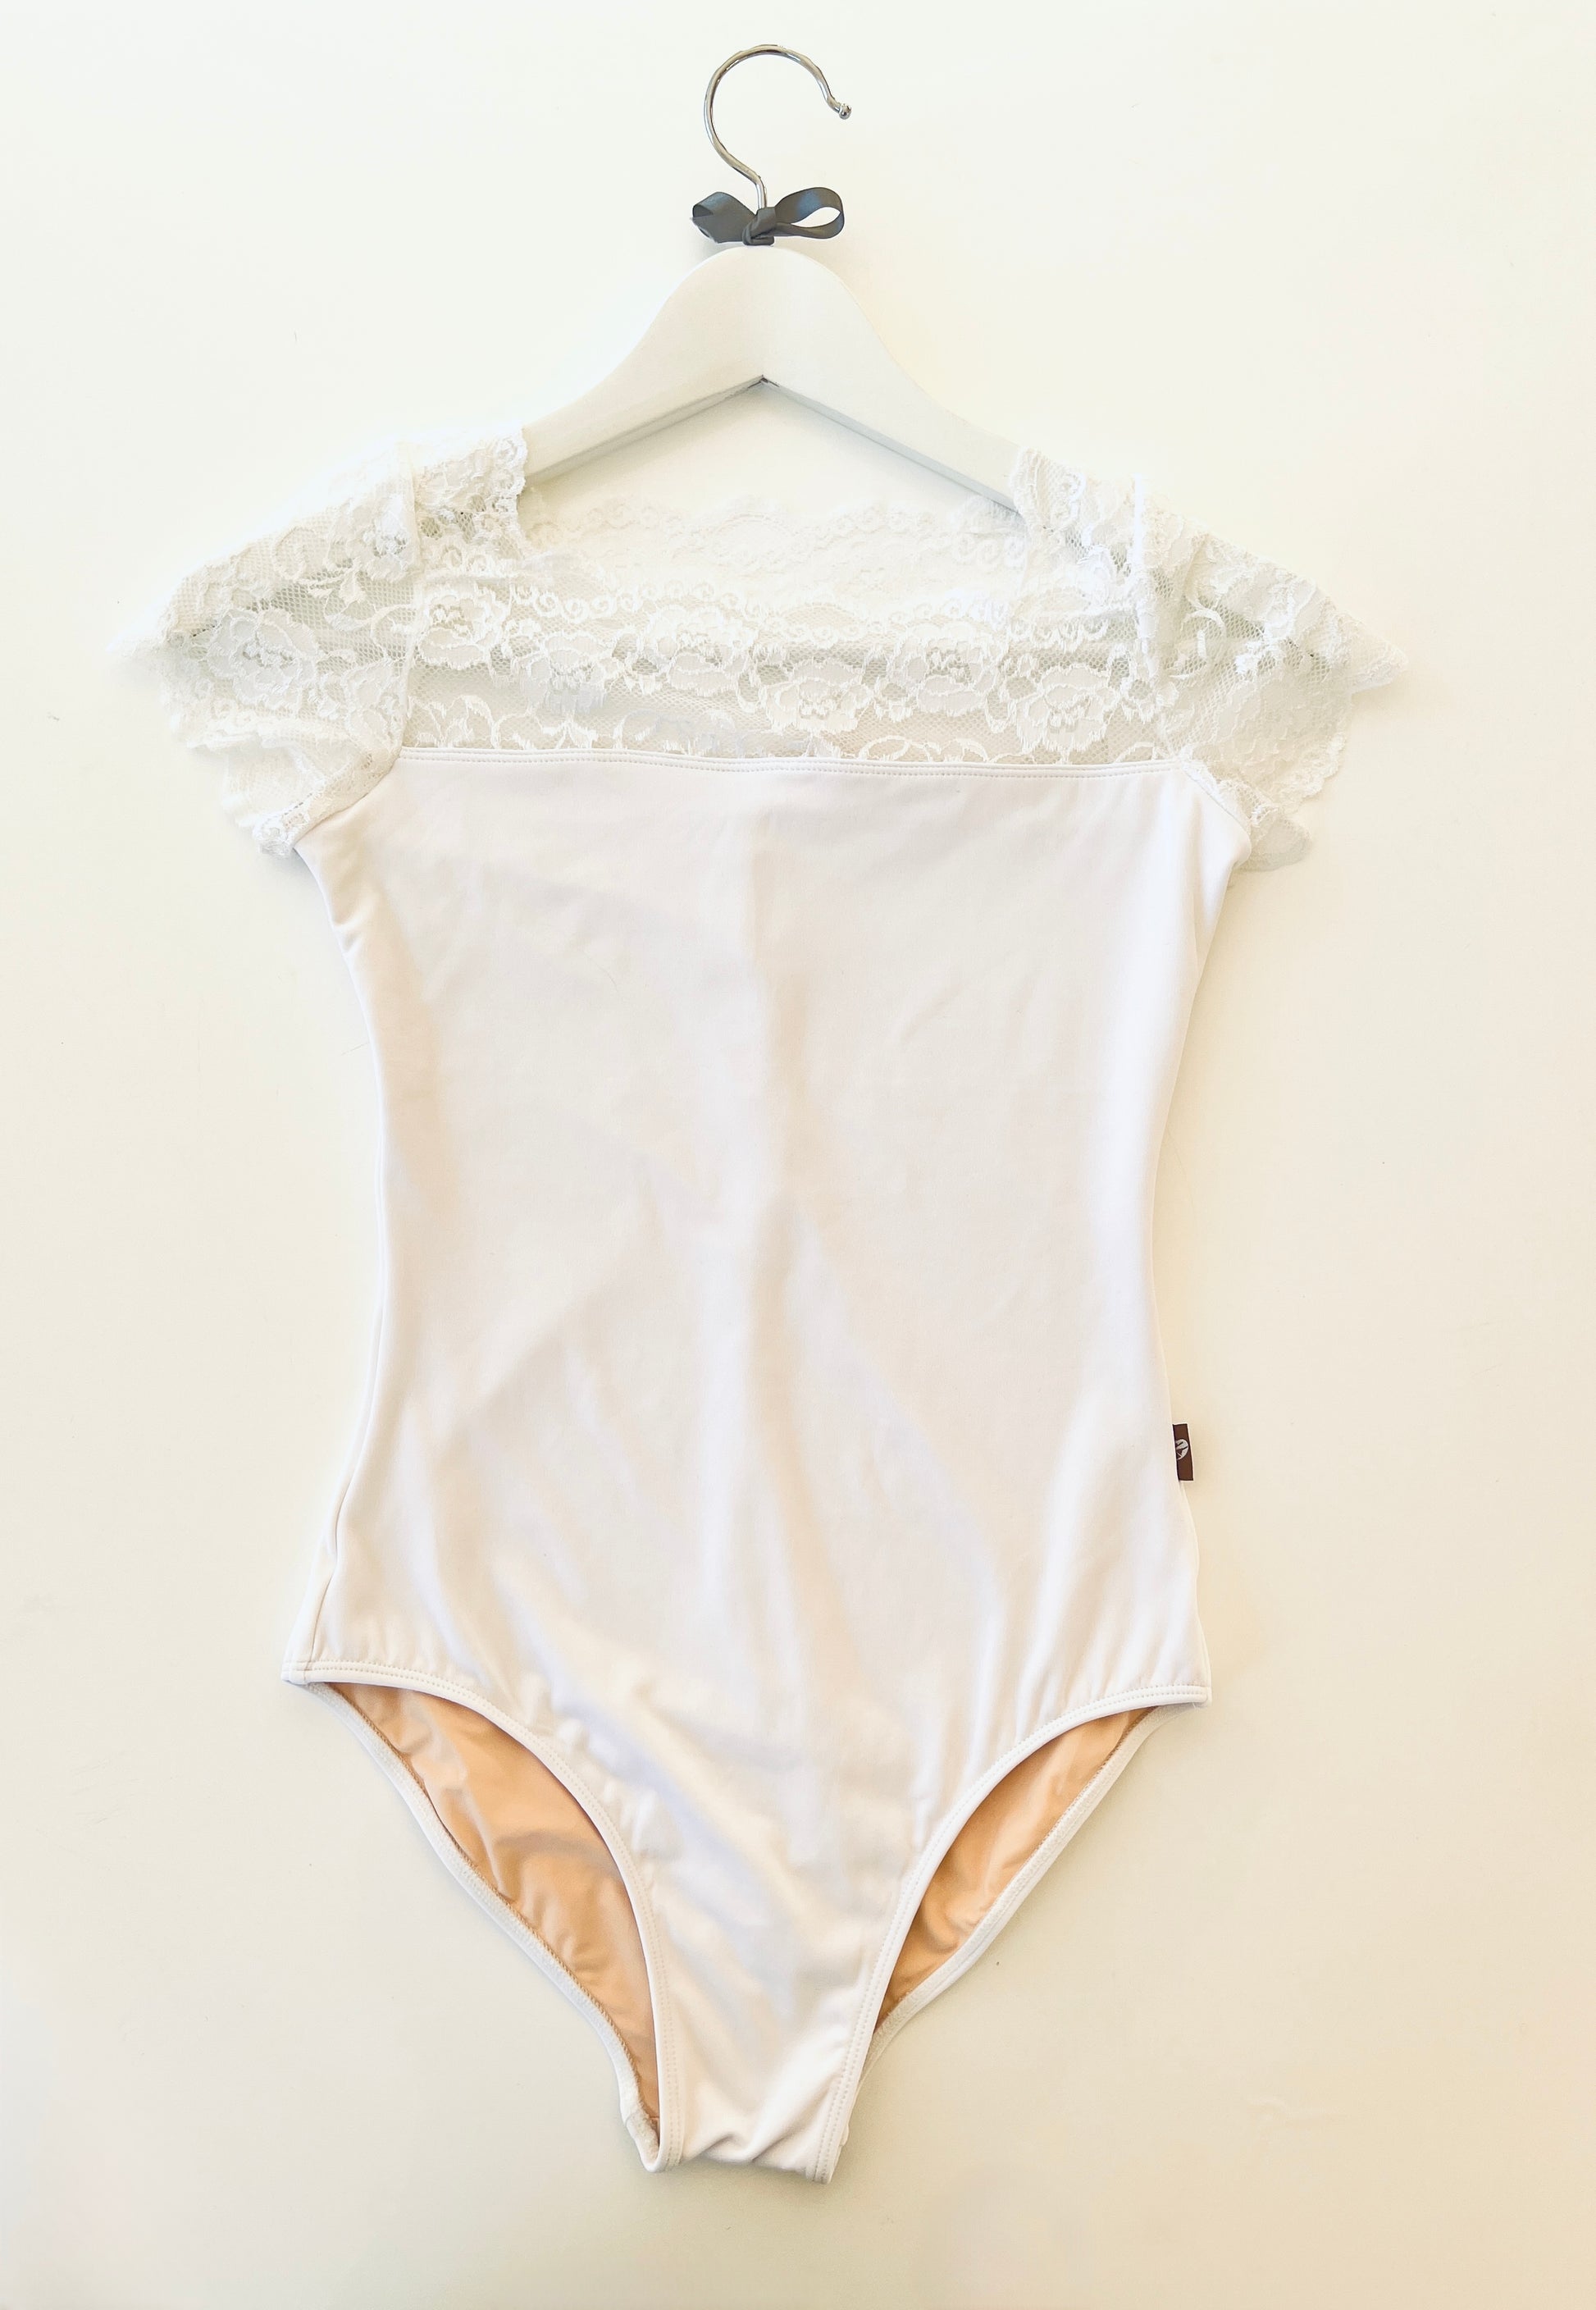 White lace top, square neck, cap sleeve leotard from The Collective Dancewear